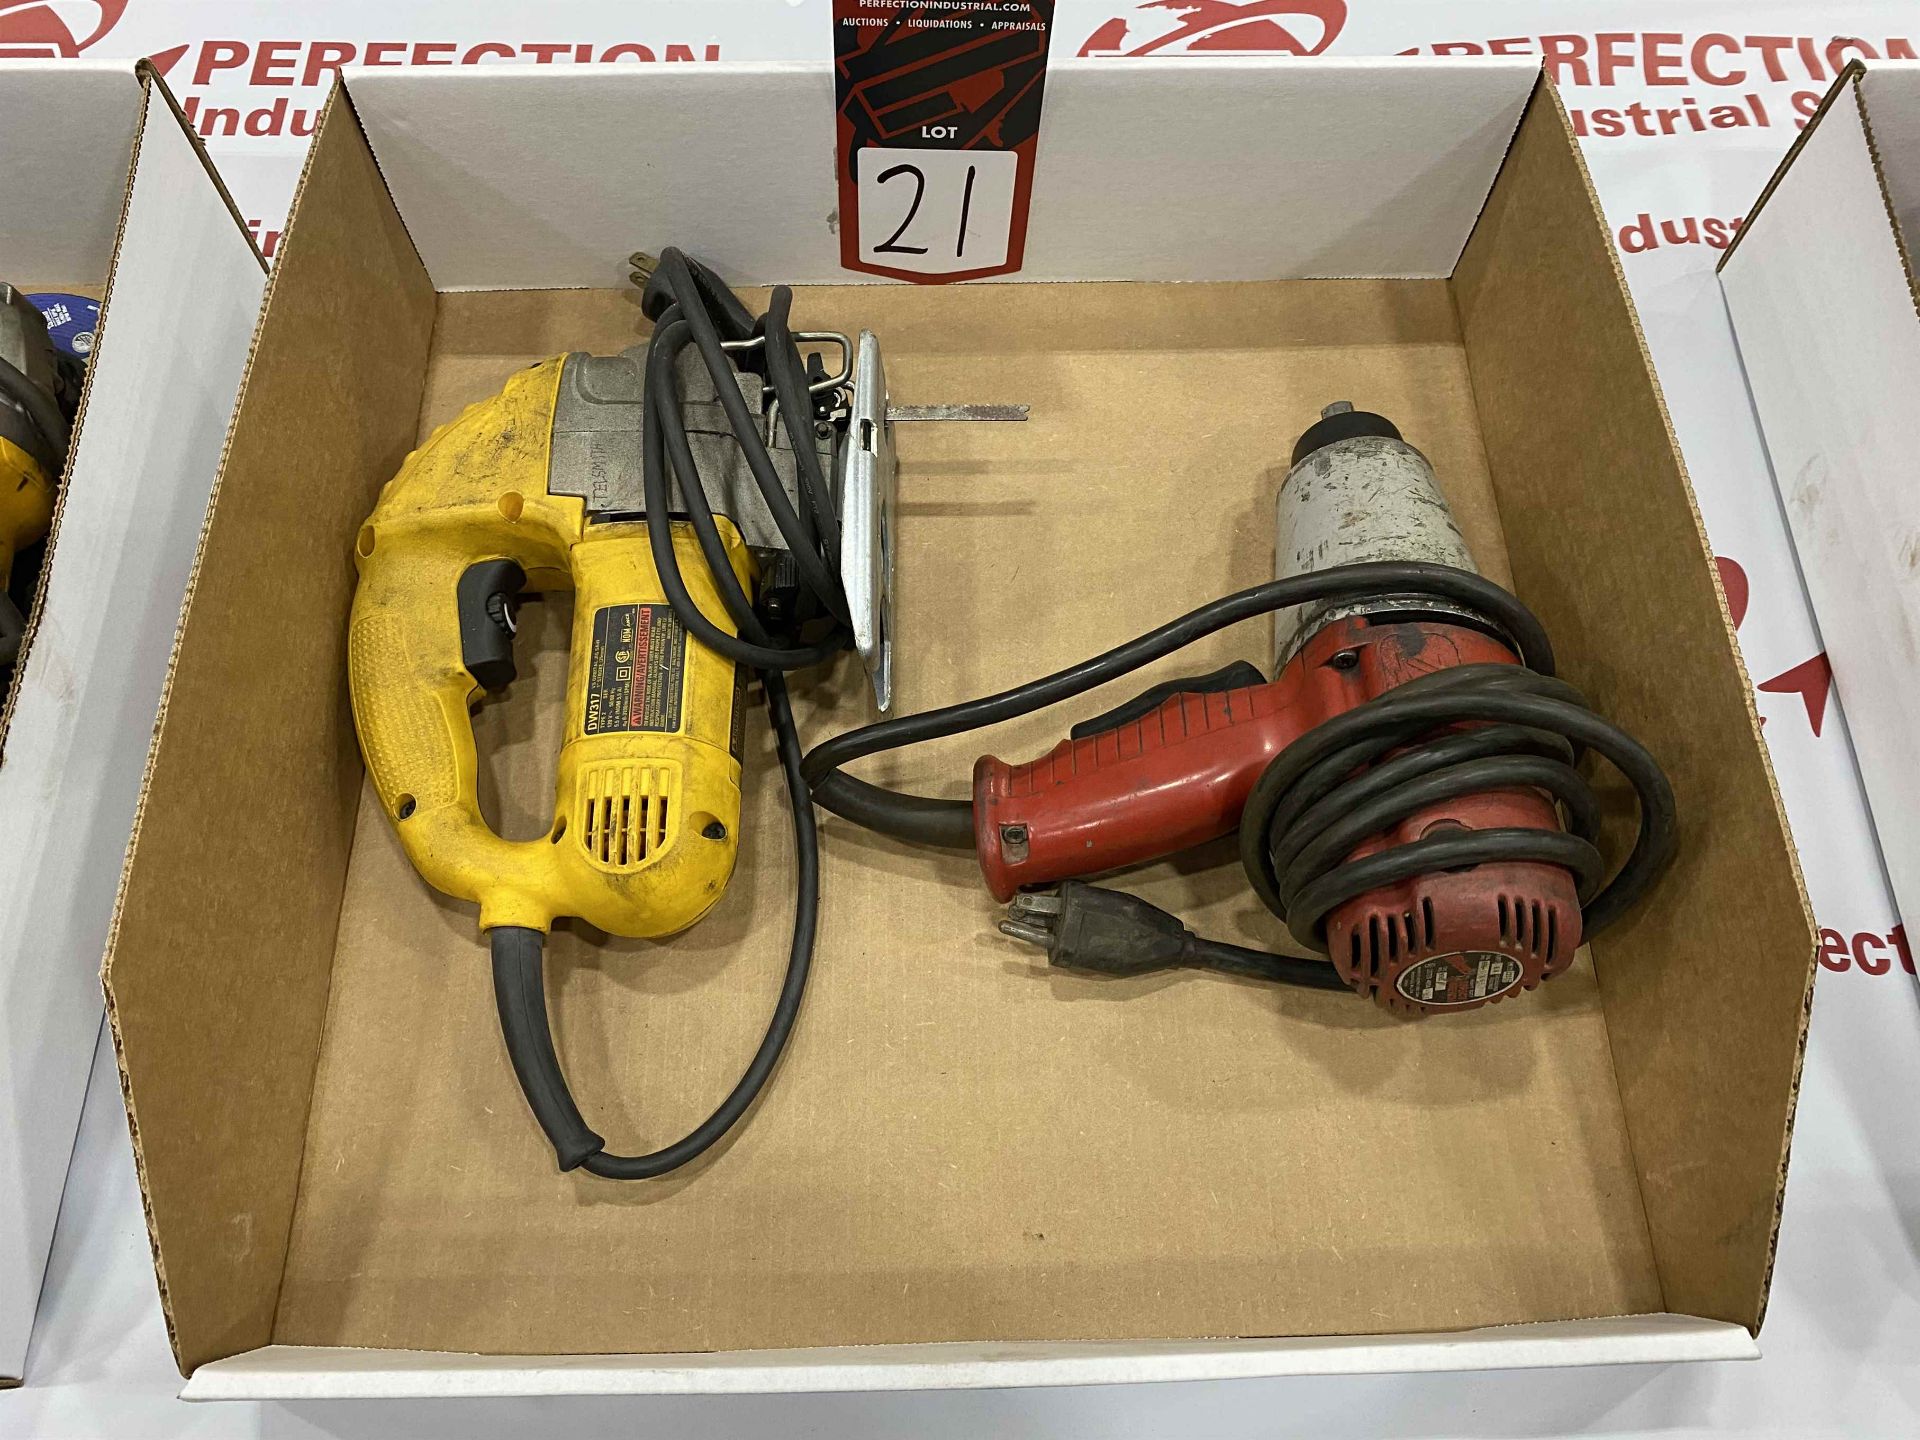 Lot Comprising (1) MILWAUKEE 1/2" impact Wrench and (1) DEWALT Jigsaw